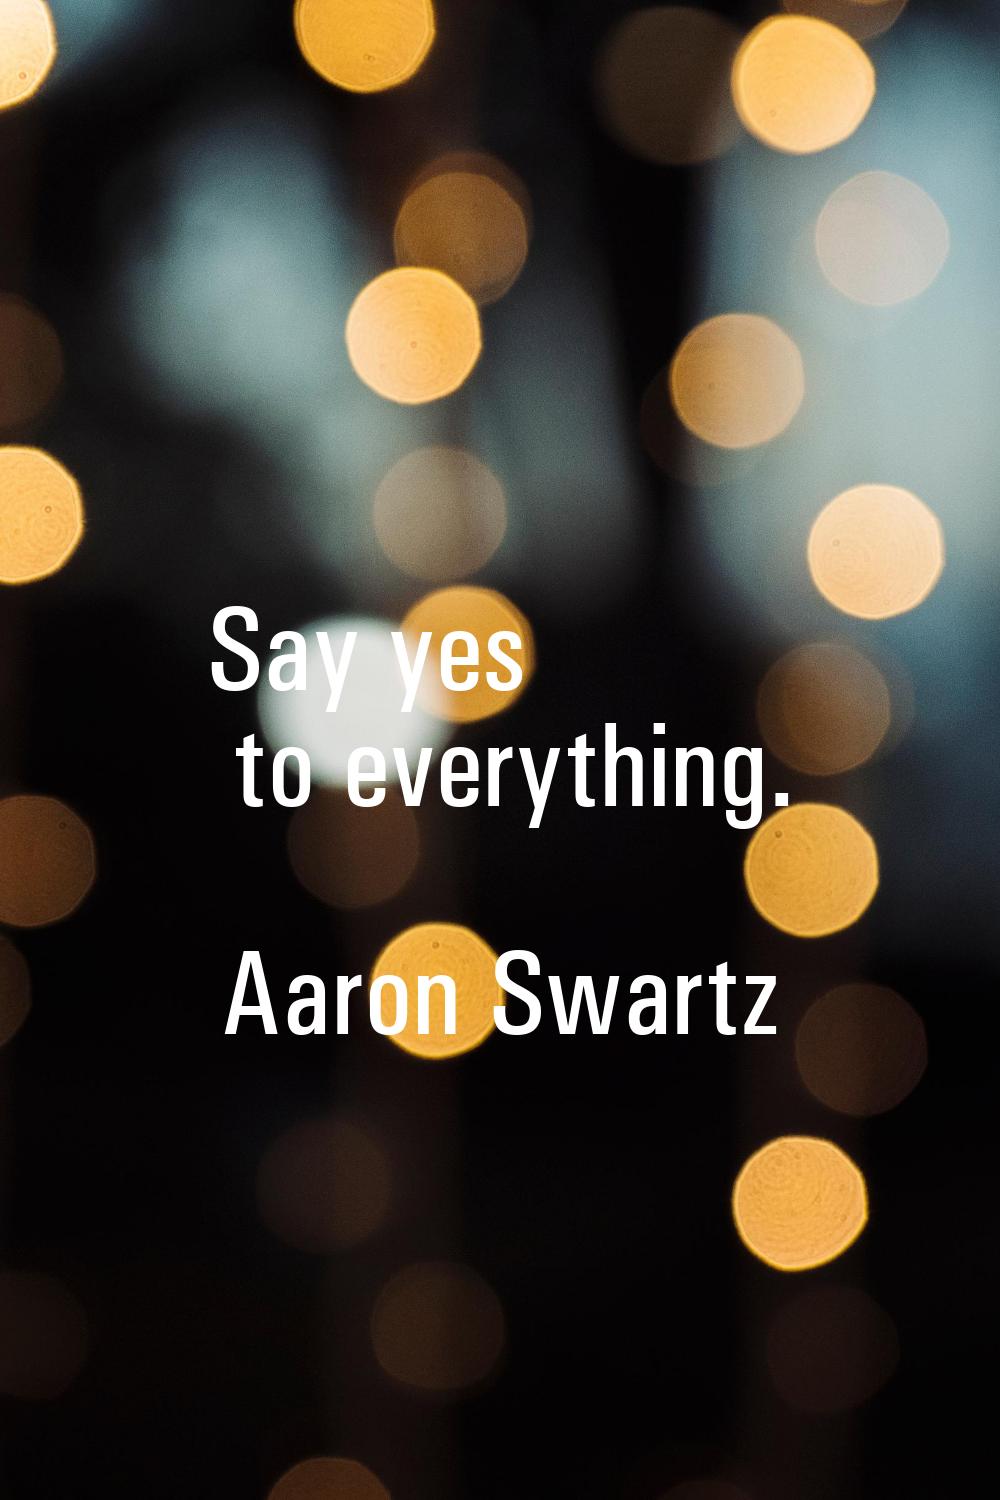 Say yes to everything.